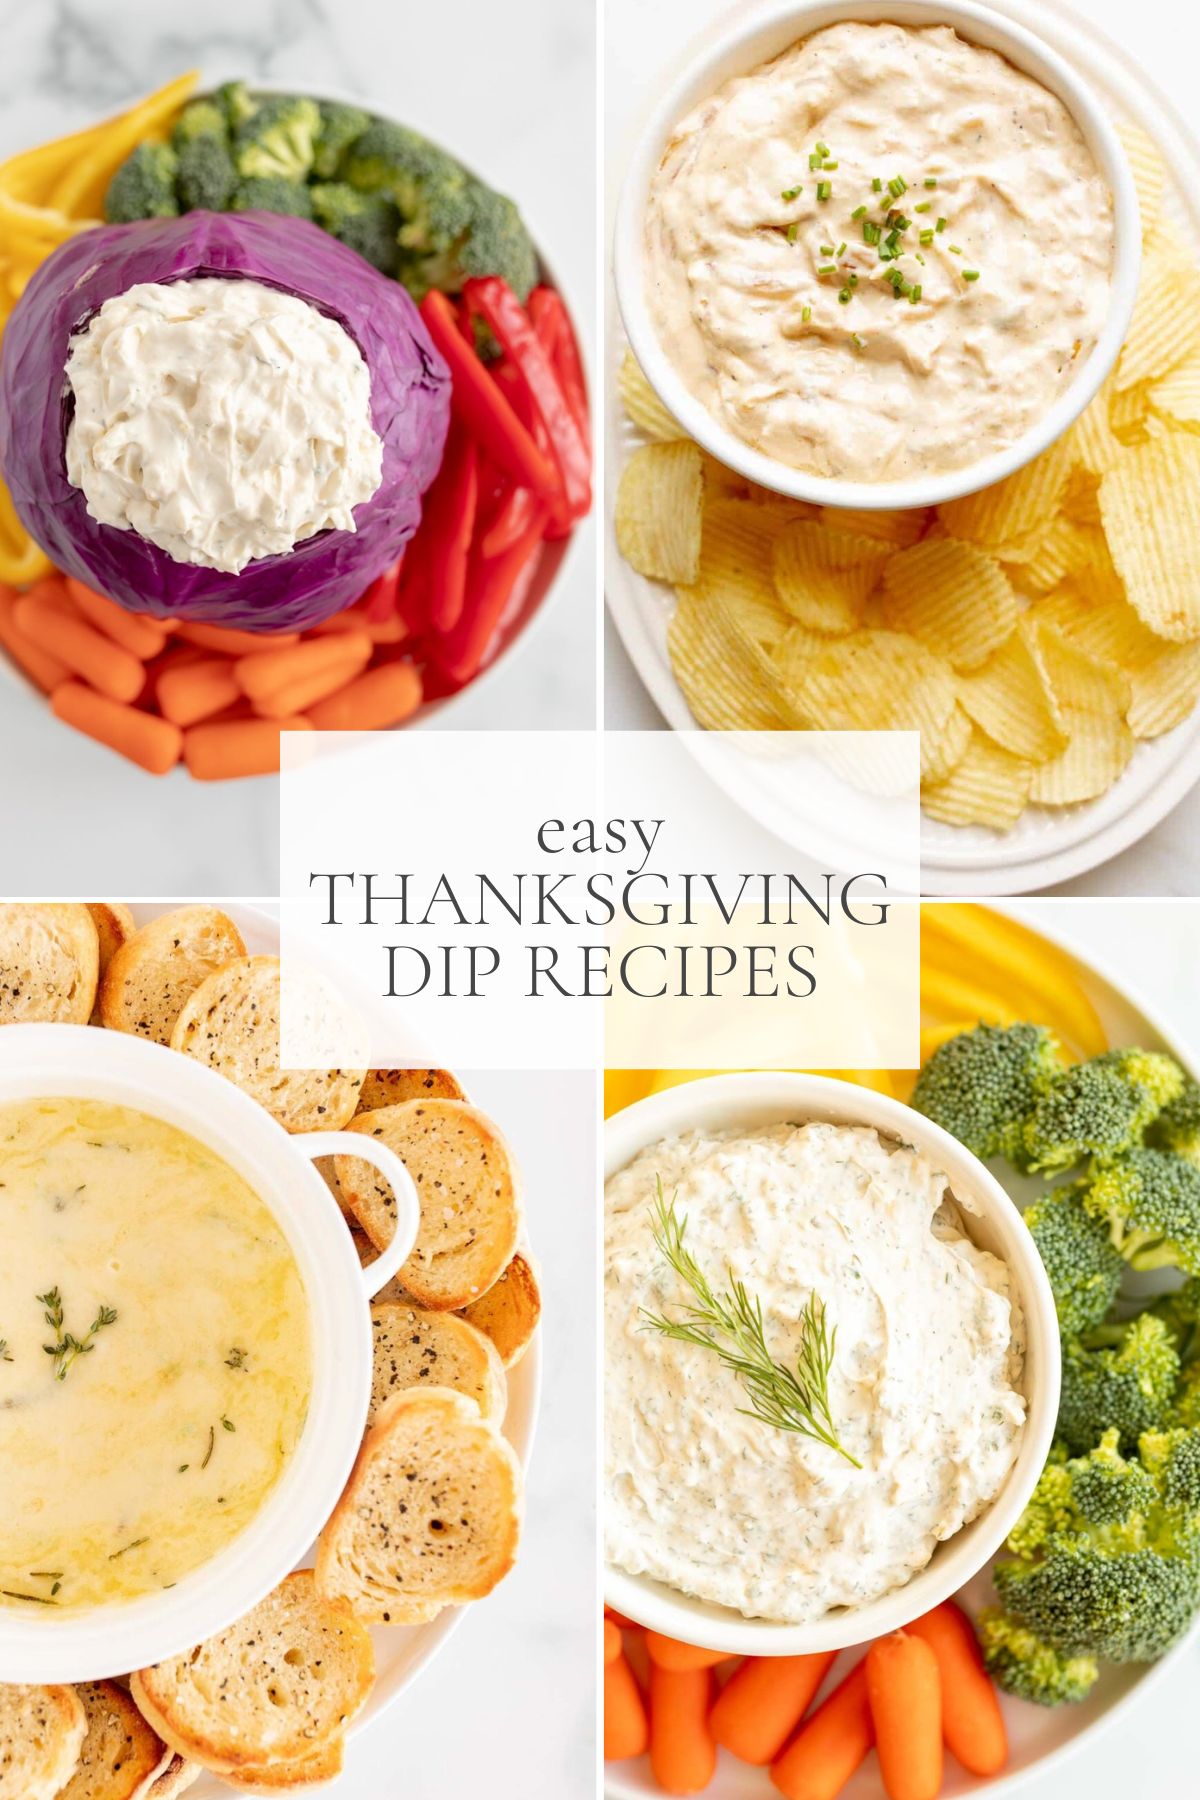 A graphic image featuring a variety of Thanksgiving dip recipes.